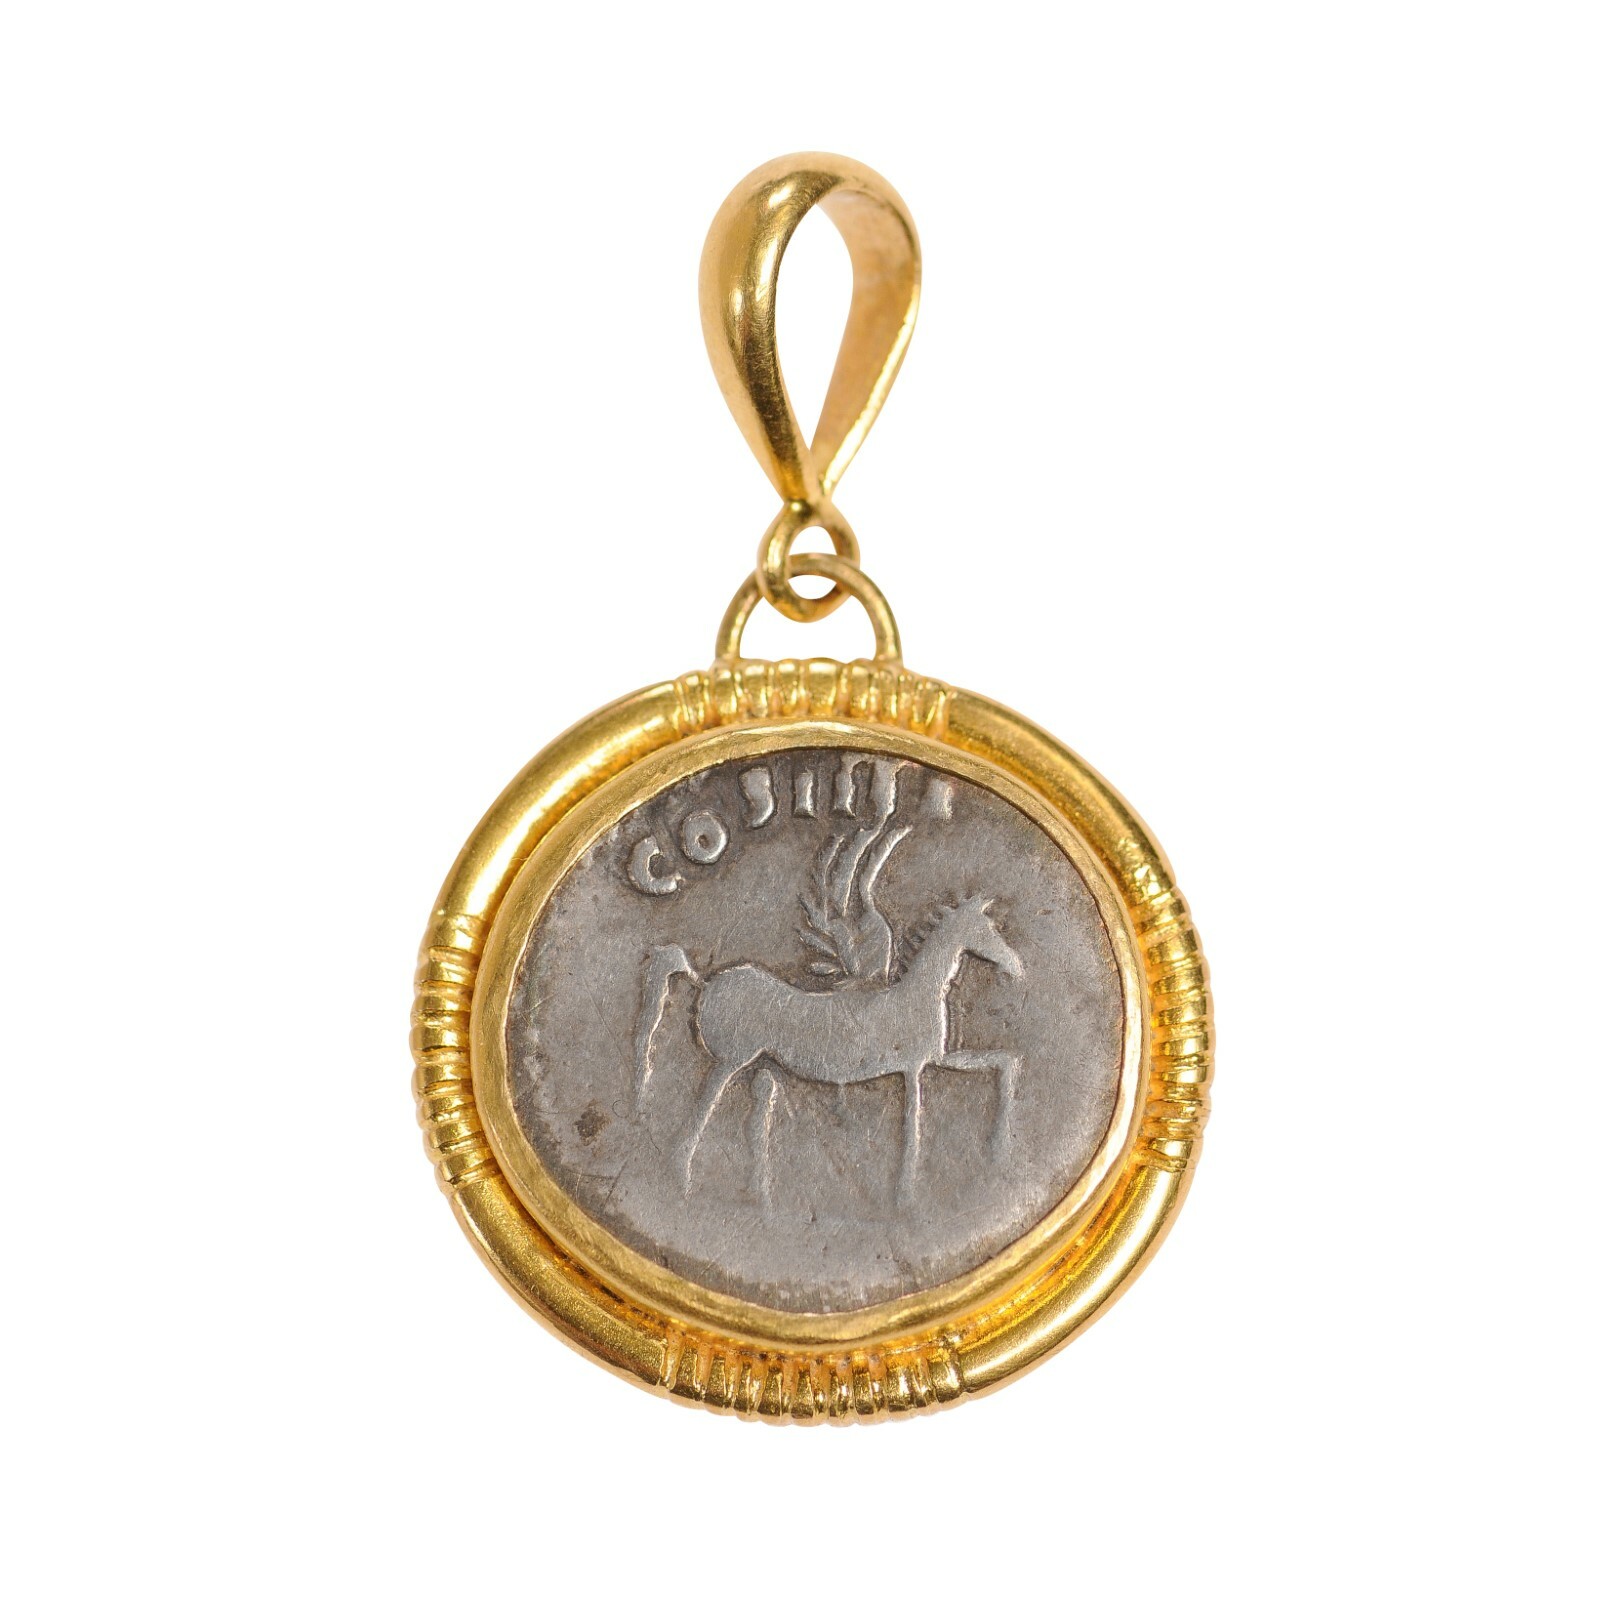 A Winged Pegasus Coin in 22kt Gold Pendant